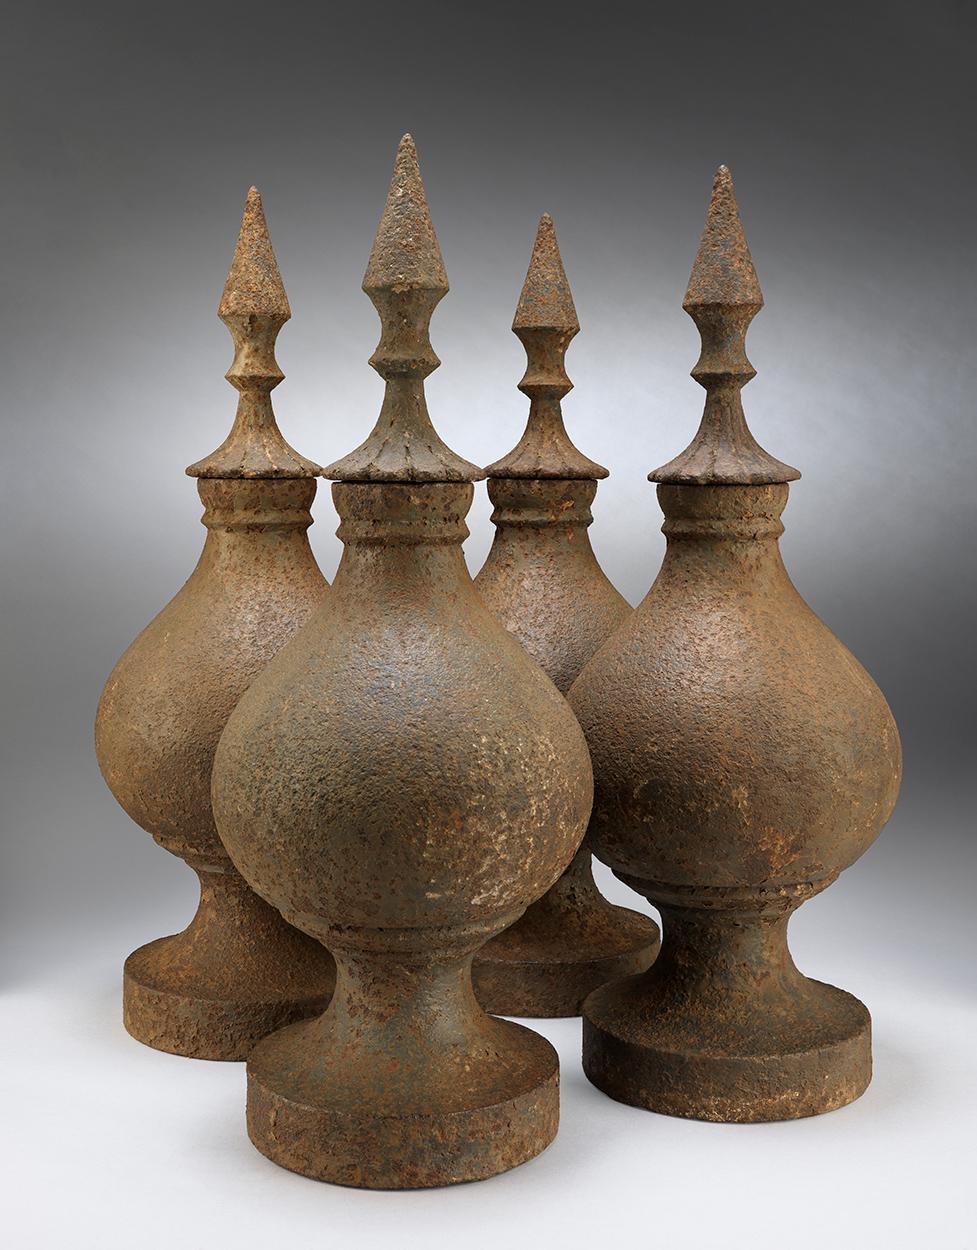 Remarkable Set of Four Graphic Architectural Finials